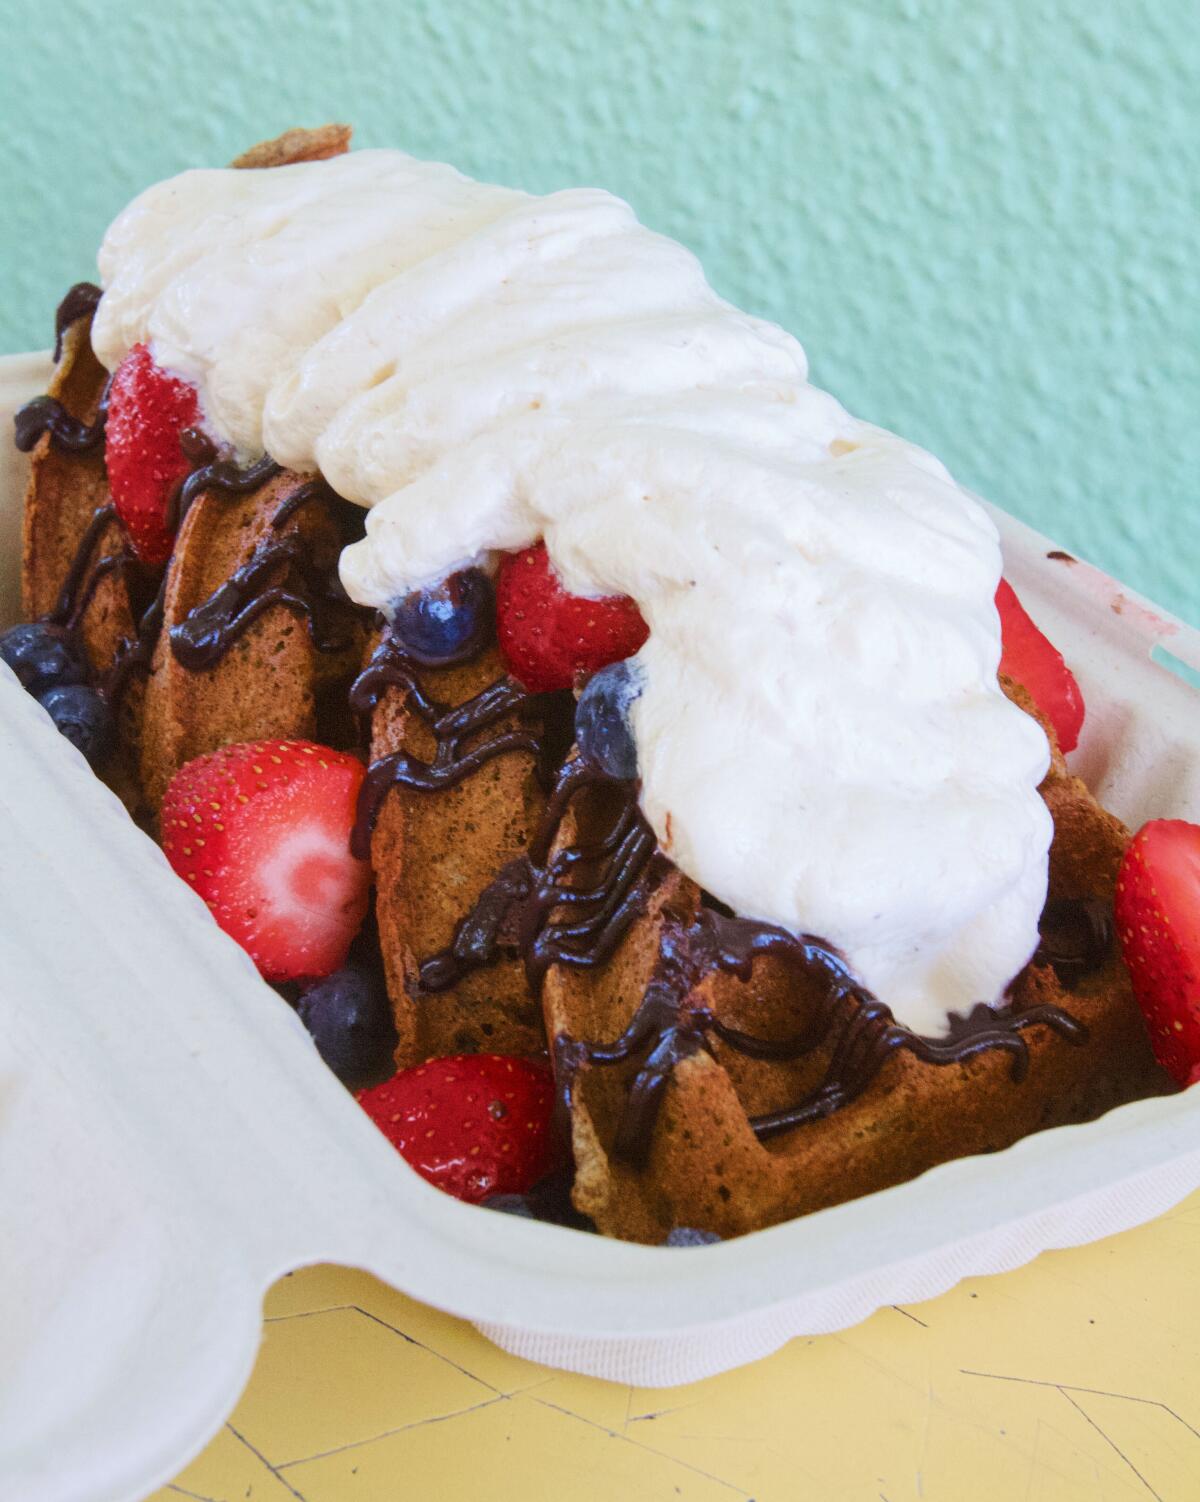 Buckwheat waffles under Earl Gray whipped cream, berries and chocolate drizzle from Kitchen Mouse